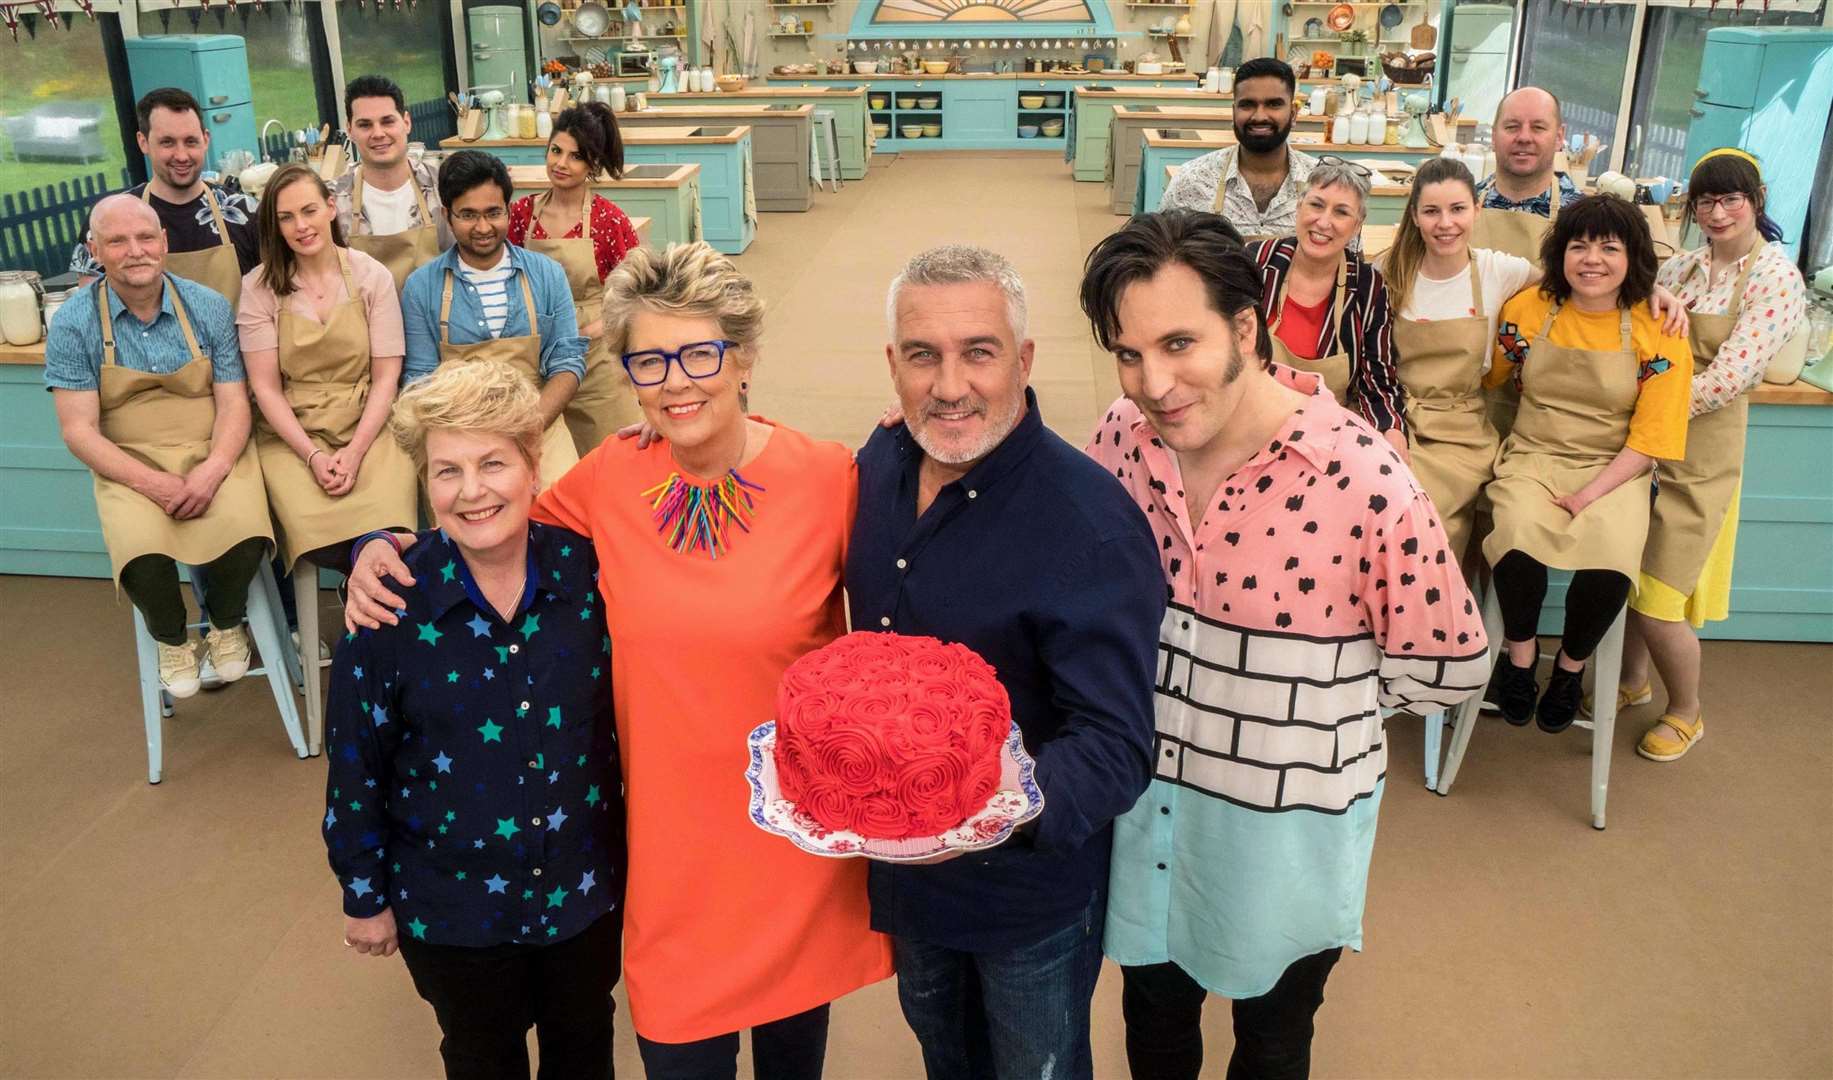 Presenters Noel fielding, Sandi Toksvig and judges Paul Hollywood, Prue Leith with the Great British Bake Off contestants. Picture: Channel 4